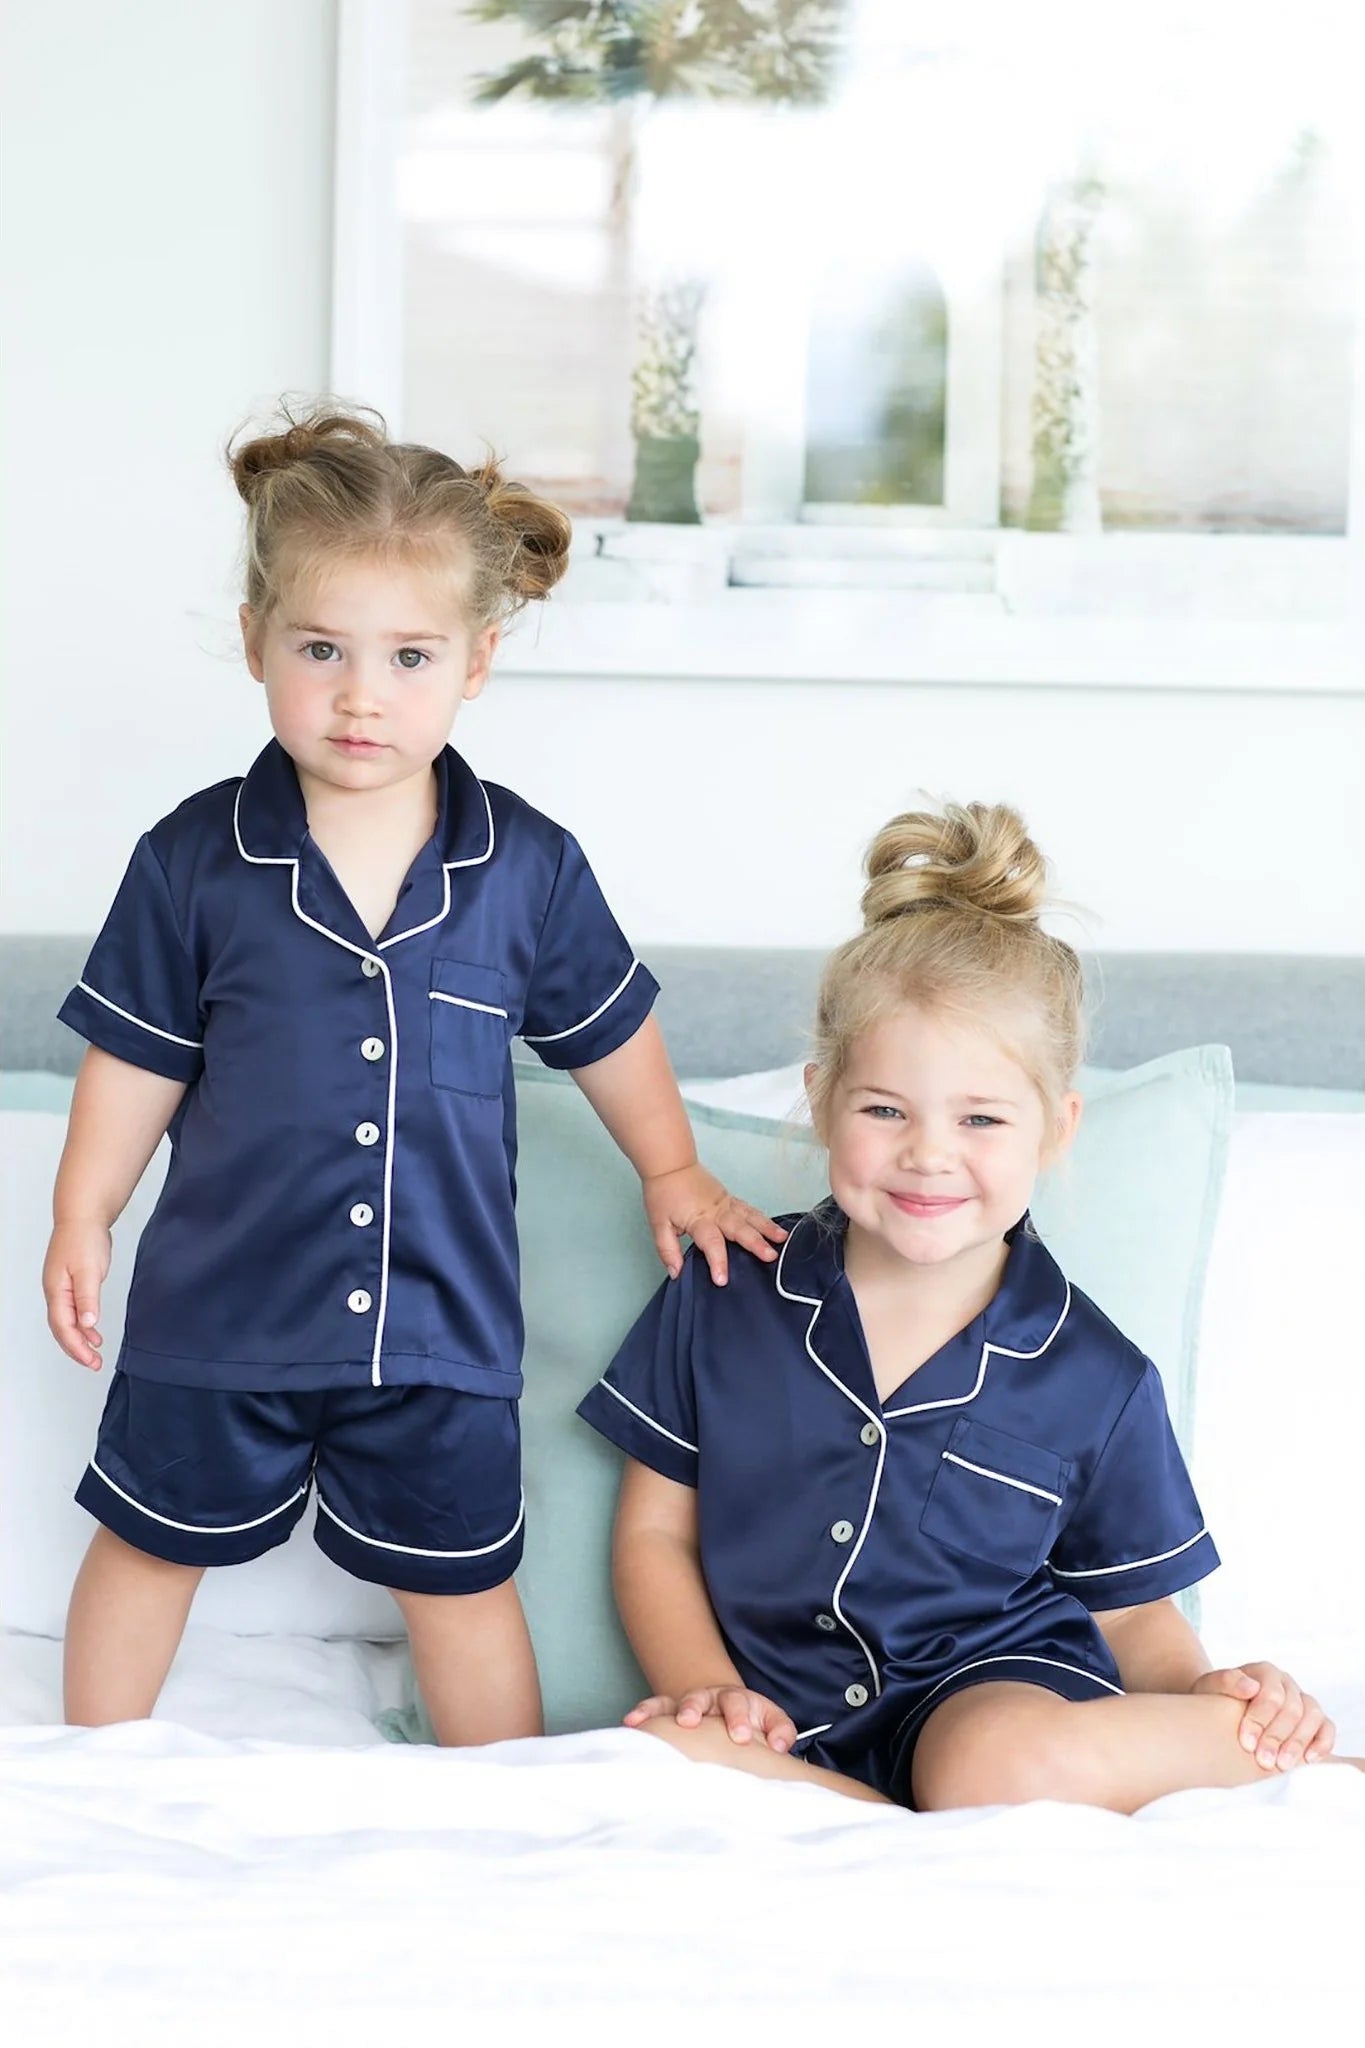 Silk Pajamas for Children: Gentle Care and Comfort